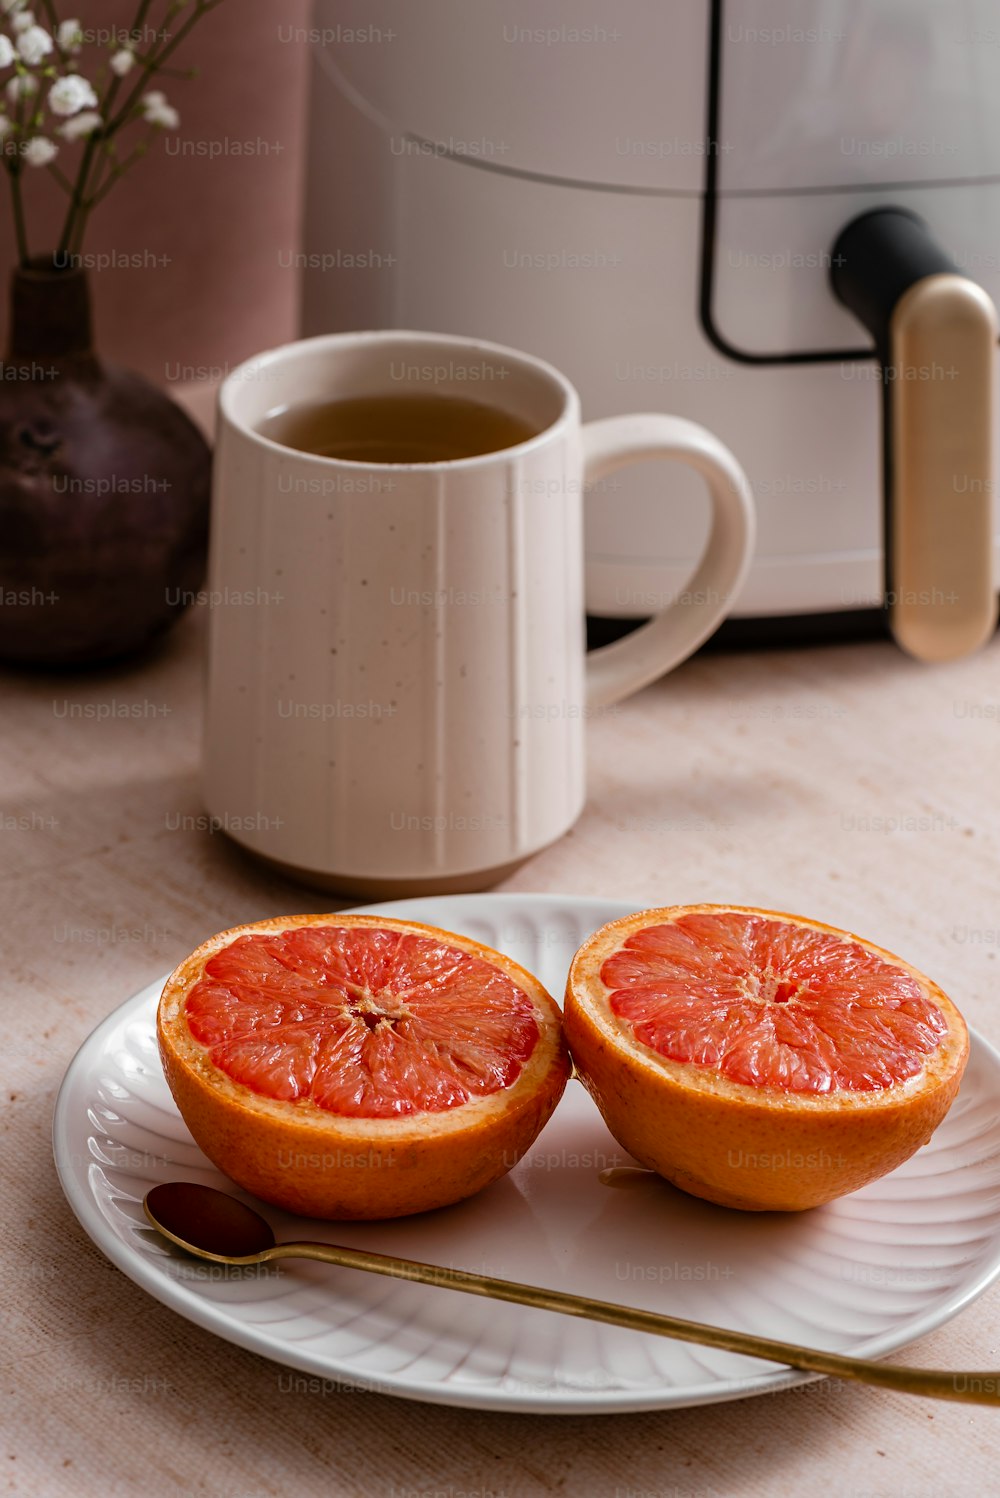 two grapefruit halves on a plate next to a cup of tea